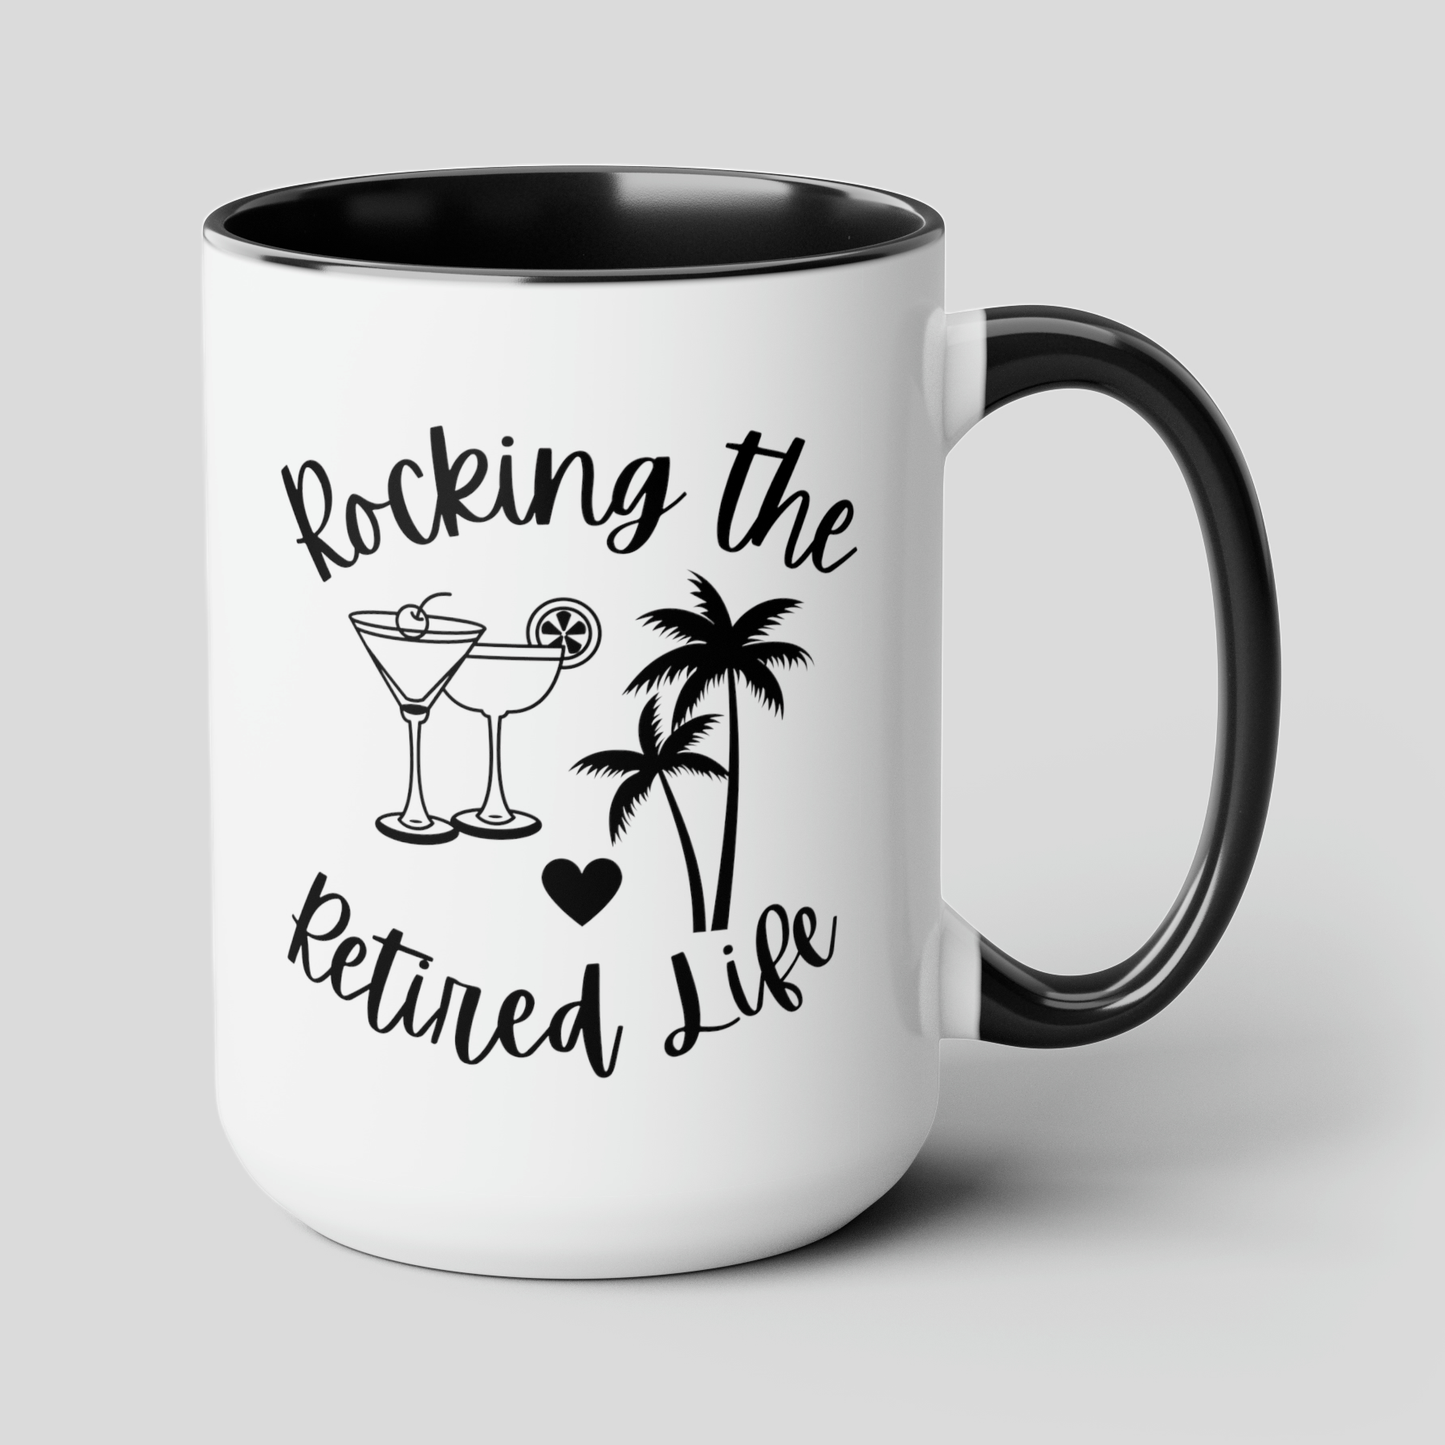 Rocking The Retired Life 15oz white with black accent funny large coffee mug gift for retirement party retiree her him waveywares wavey wares wavywares wavy wares cover